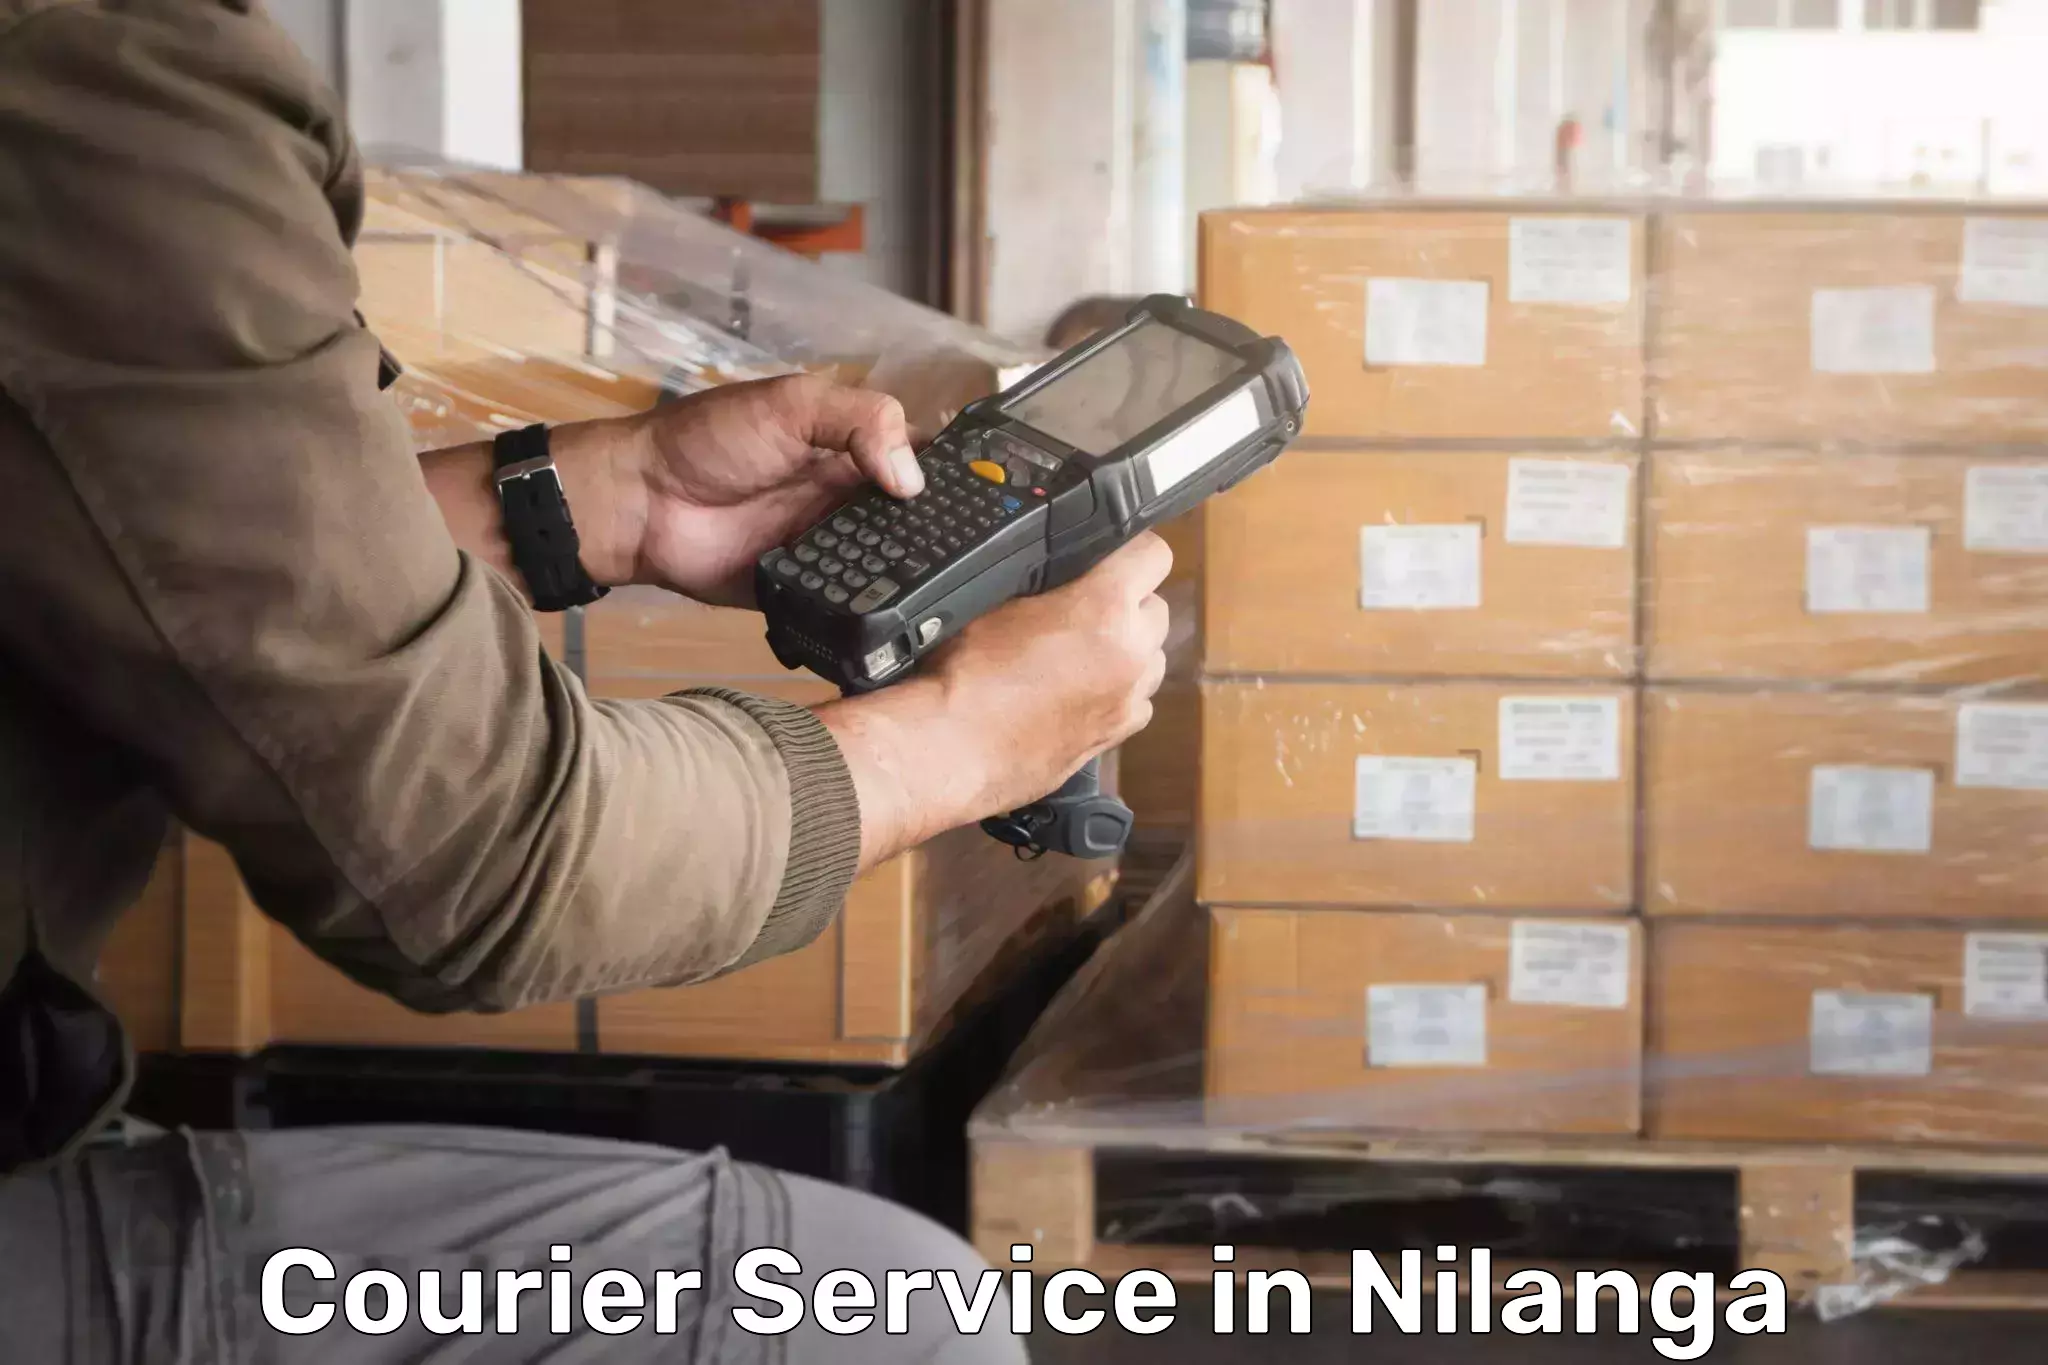 Courier service booking in Nilanga